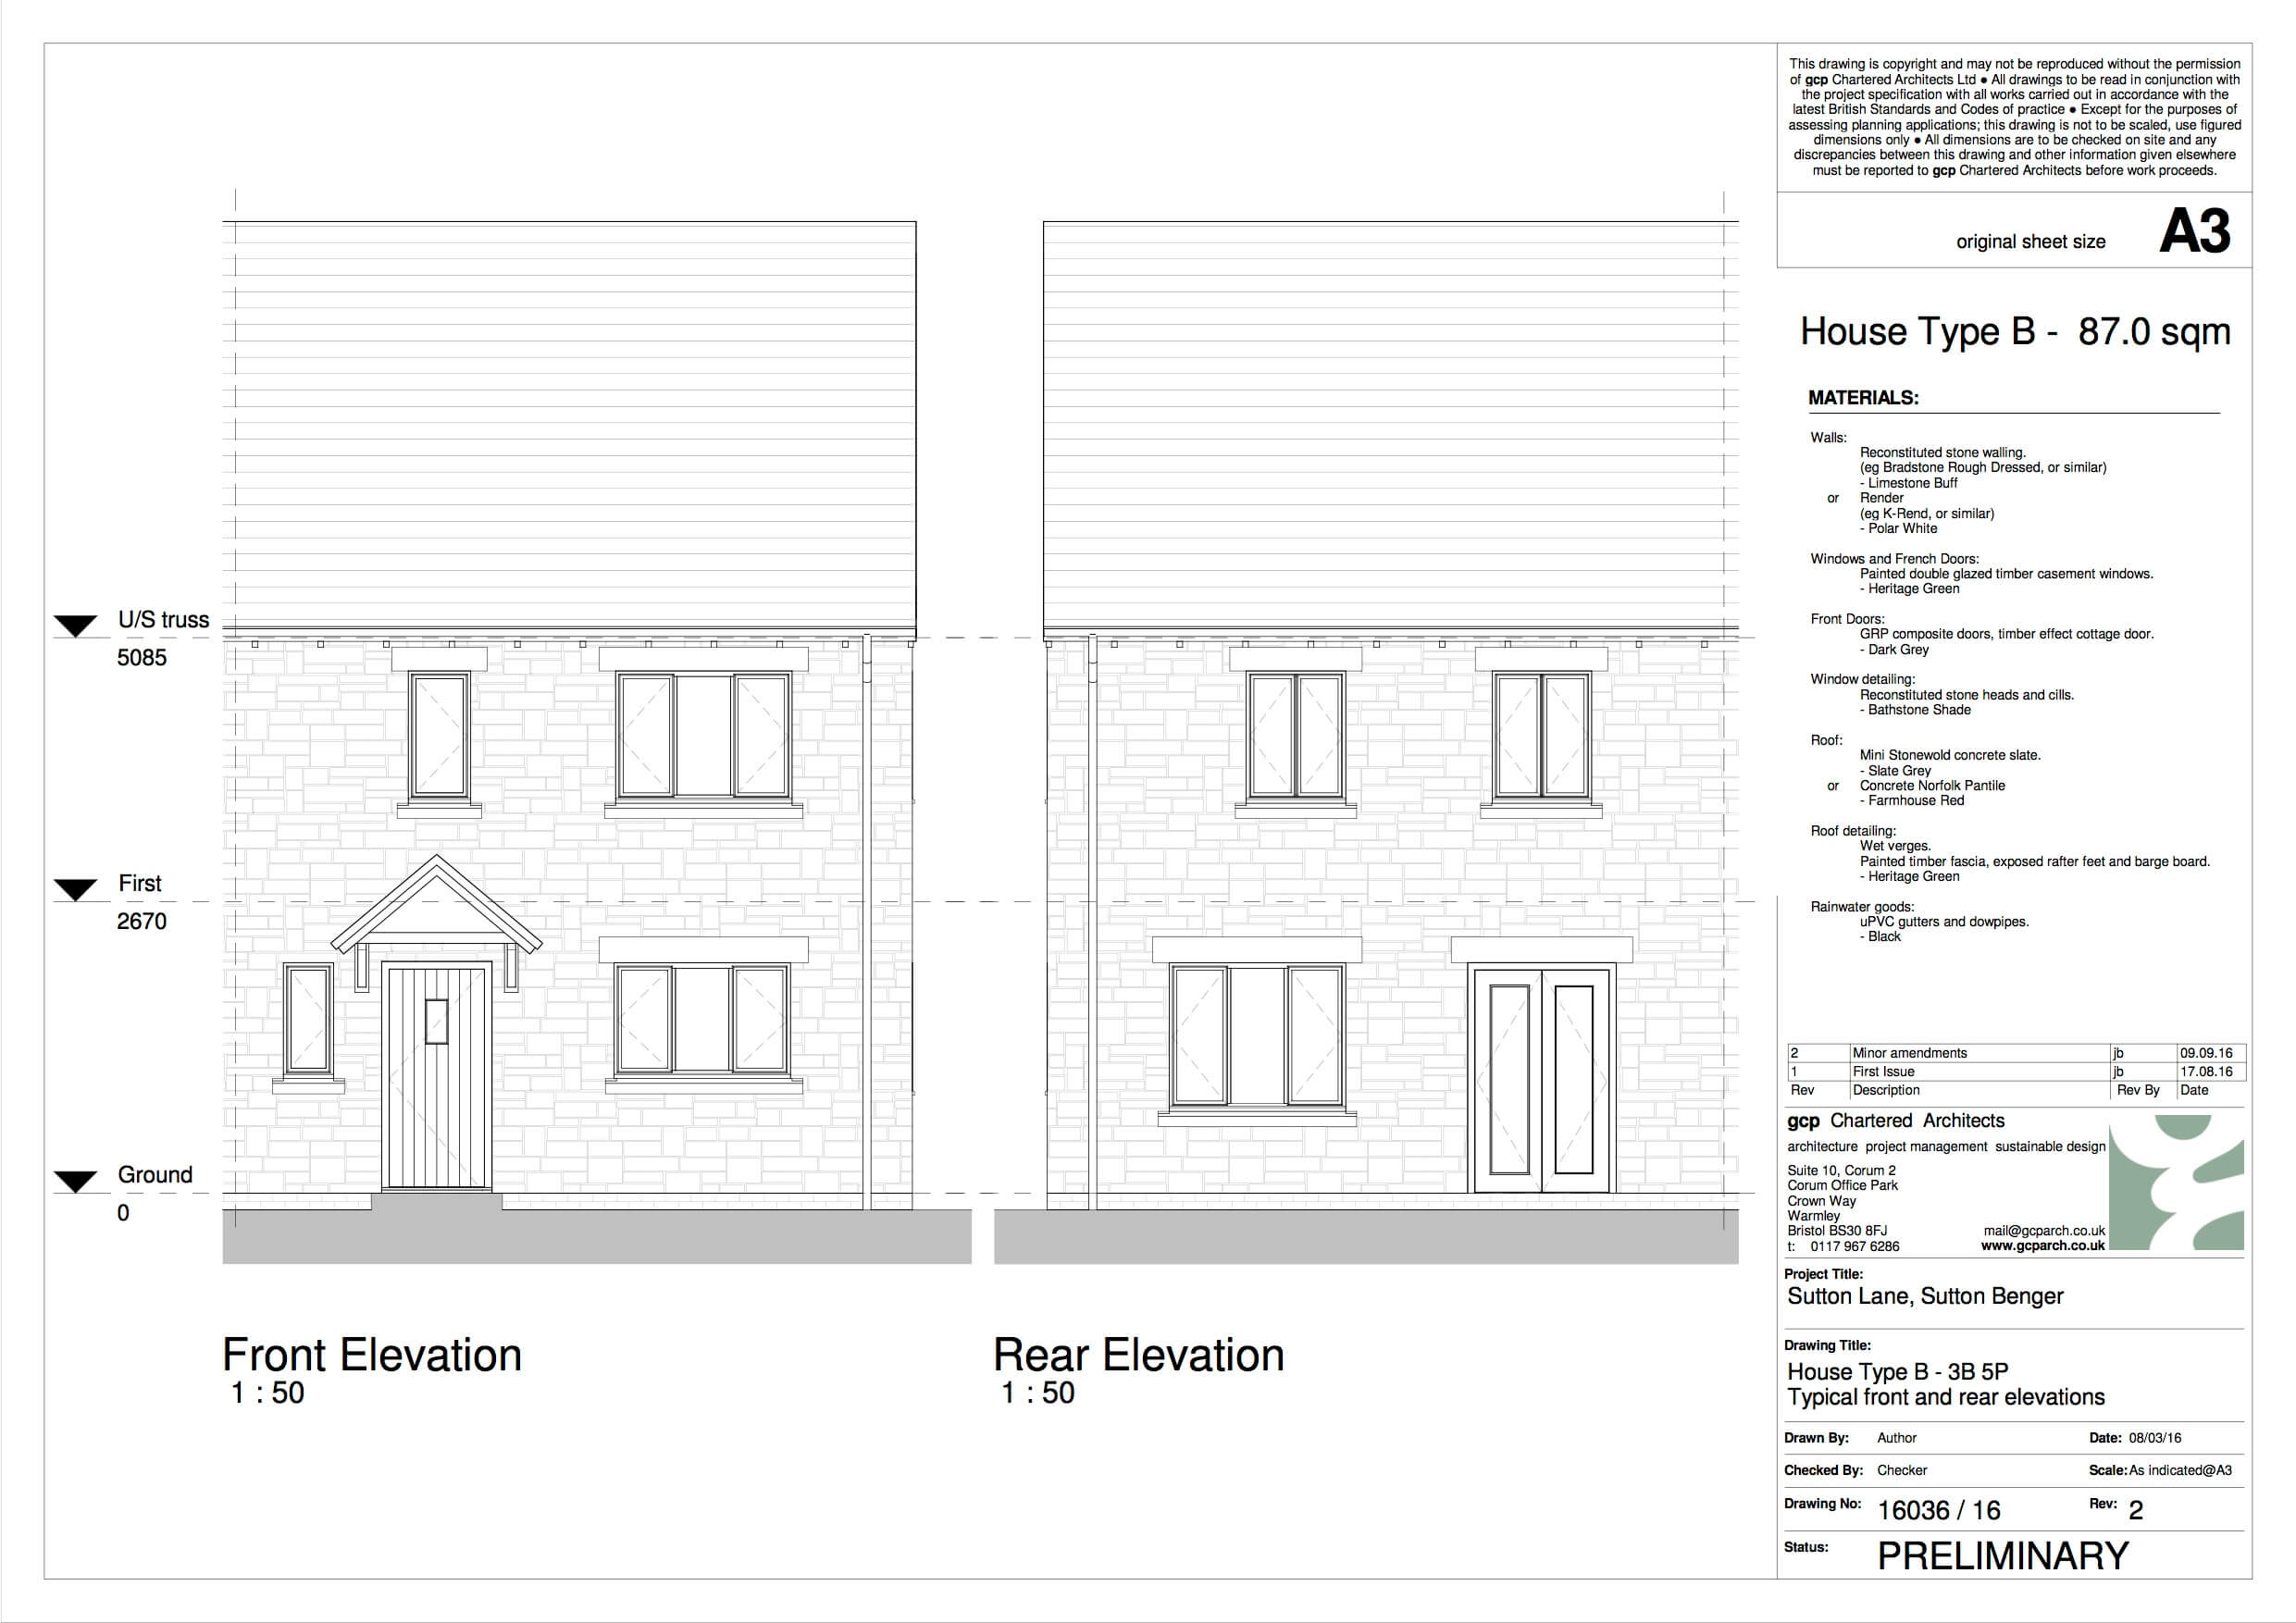 Stonewater HTB Elevations